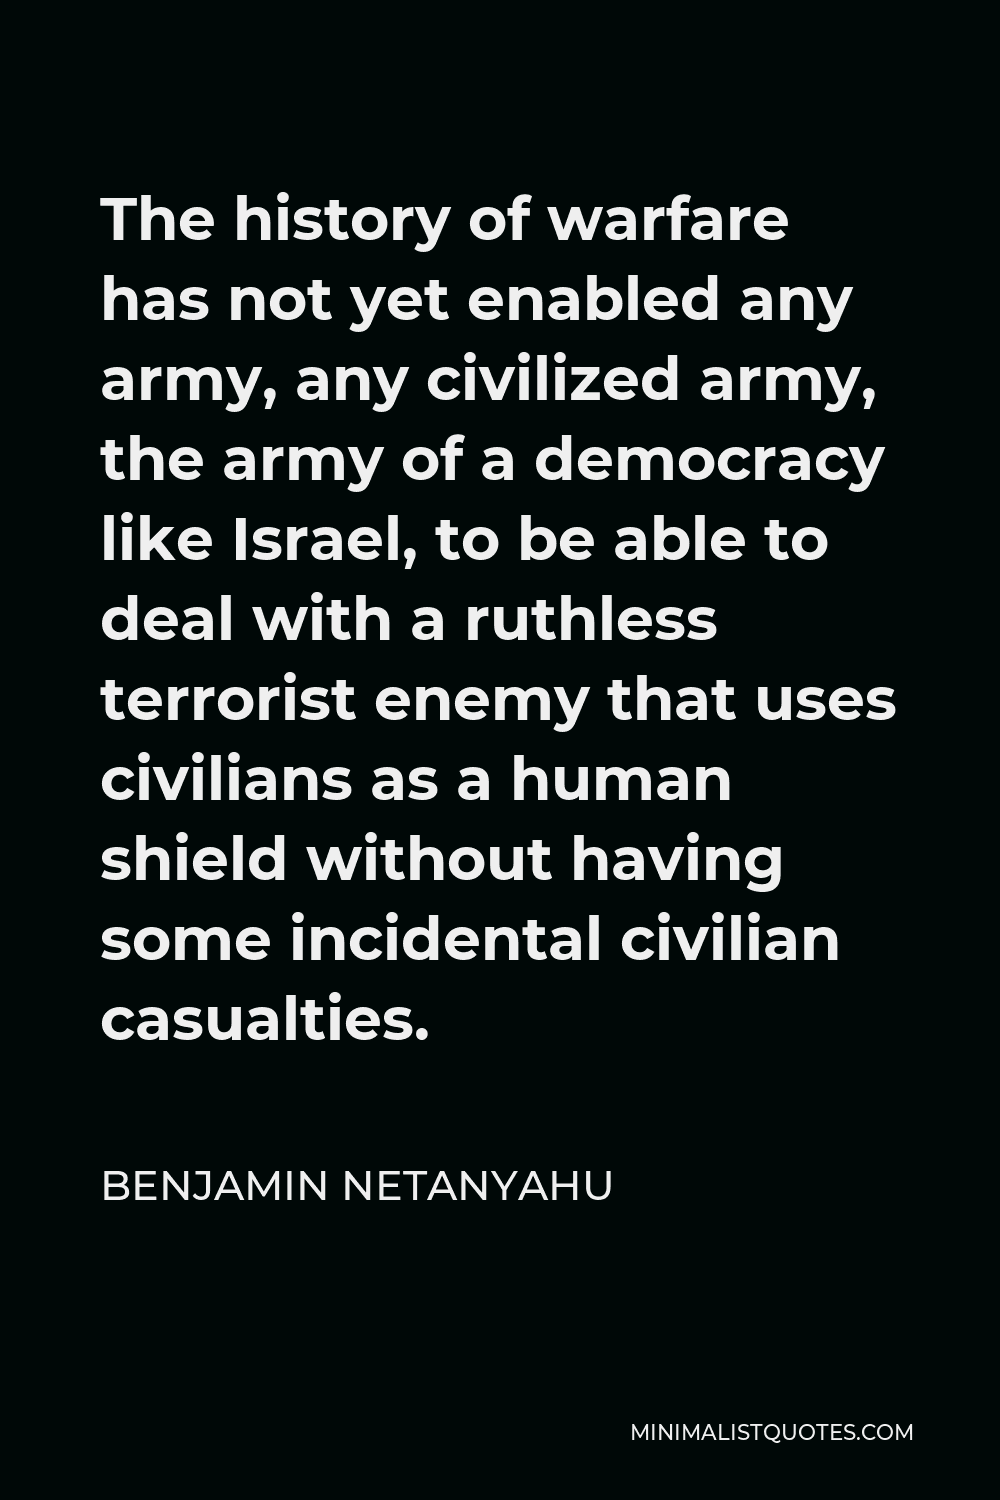 Benjamin Netanyahu Quote - The history of warfare has not yet enabled any army, any civilized army, the army of a democracy like Israel, to be able to deal with a ruthless terrorist enemy that uses civilians as a human shield without having some incidental civilian casualties.